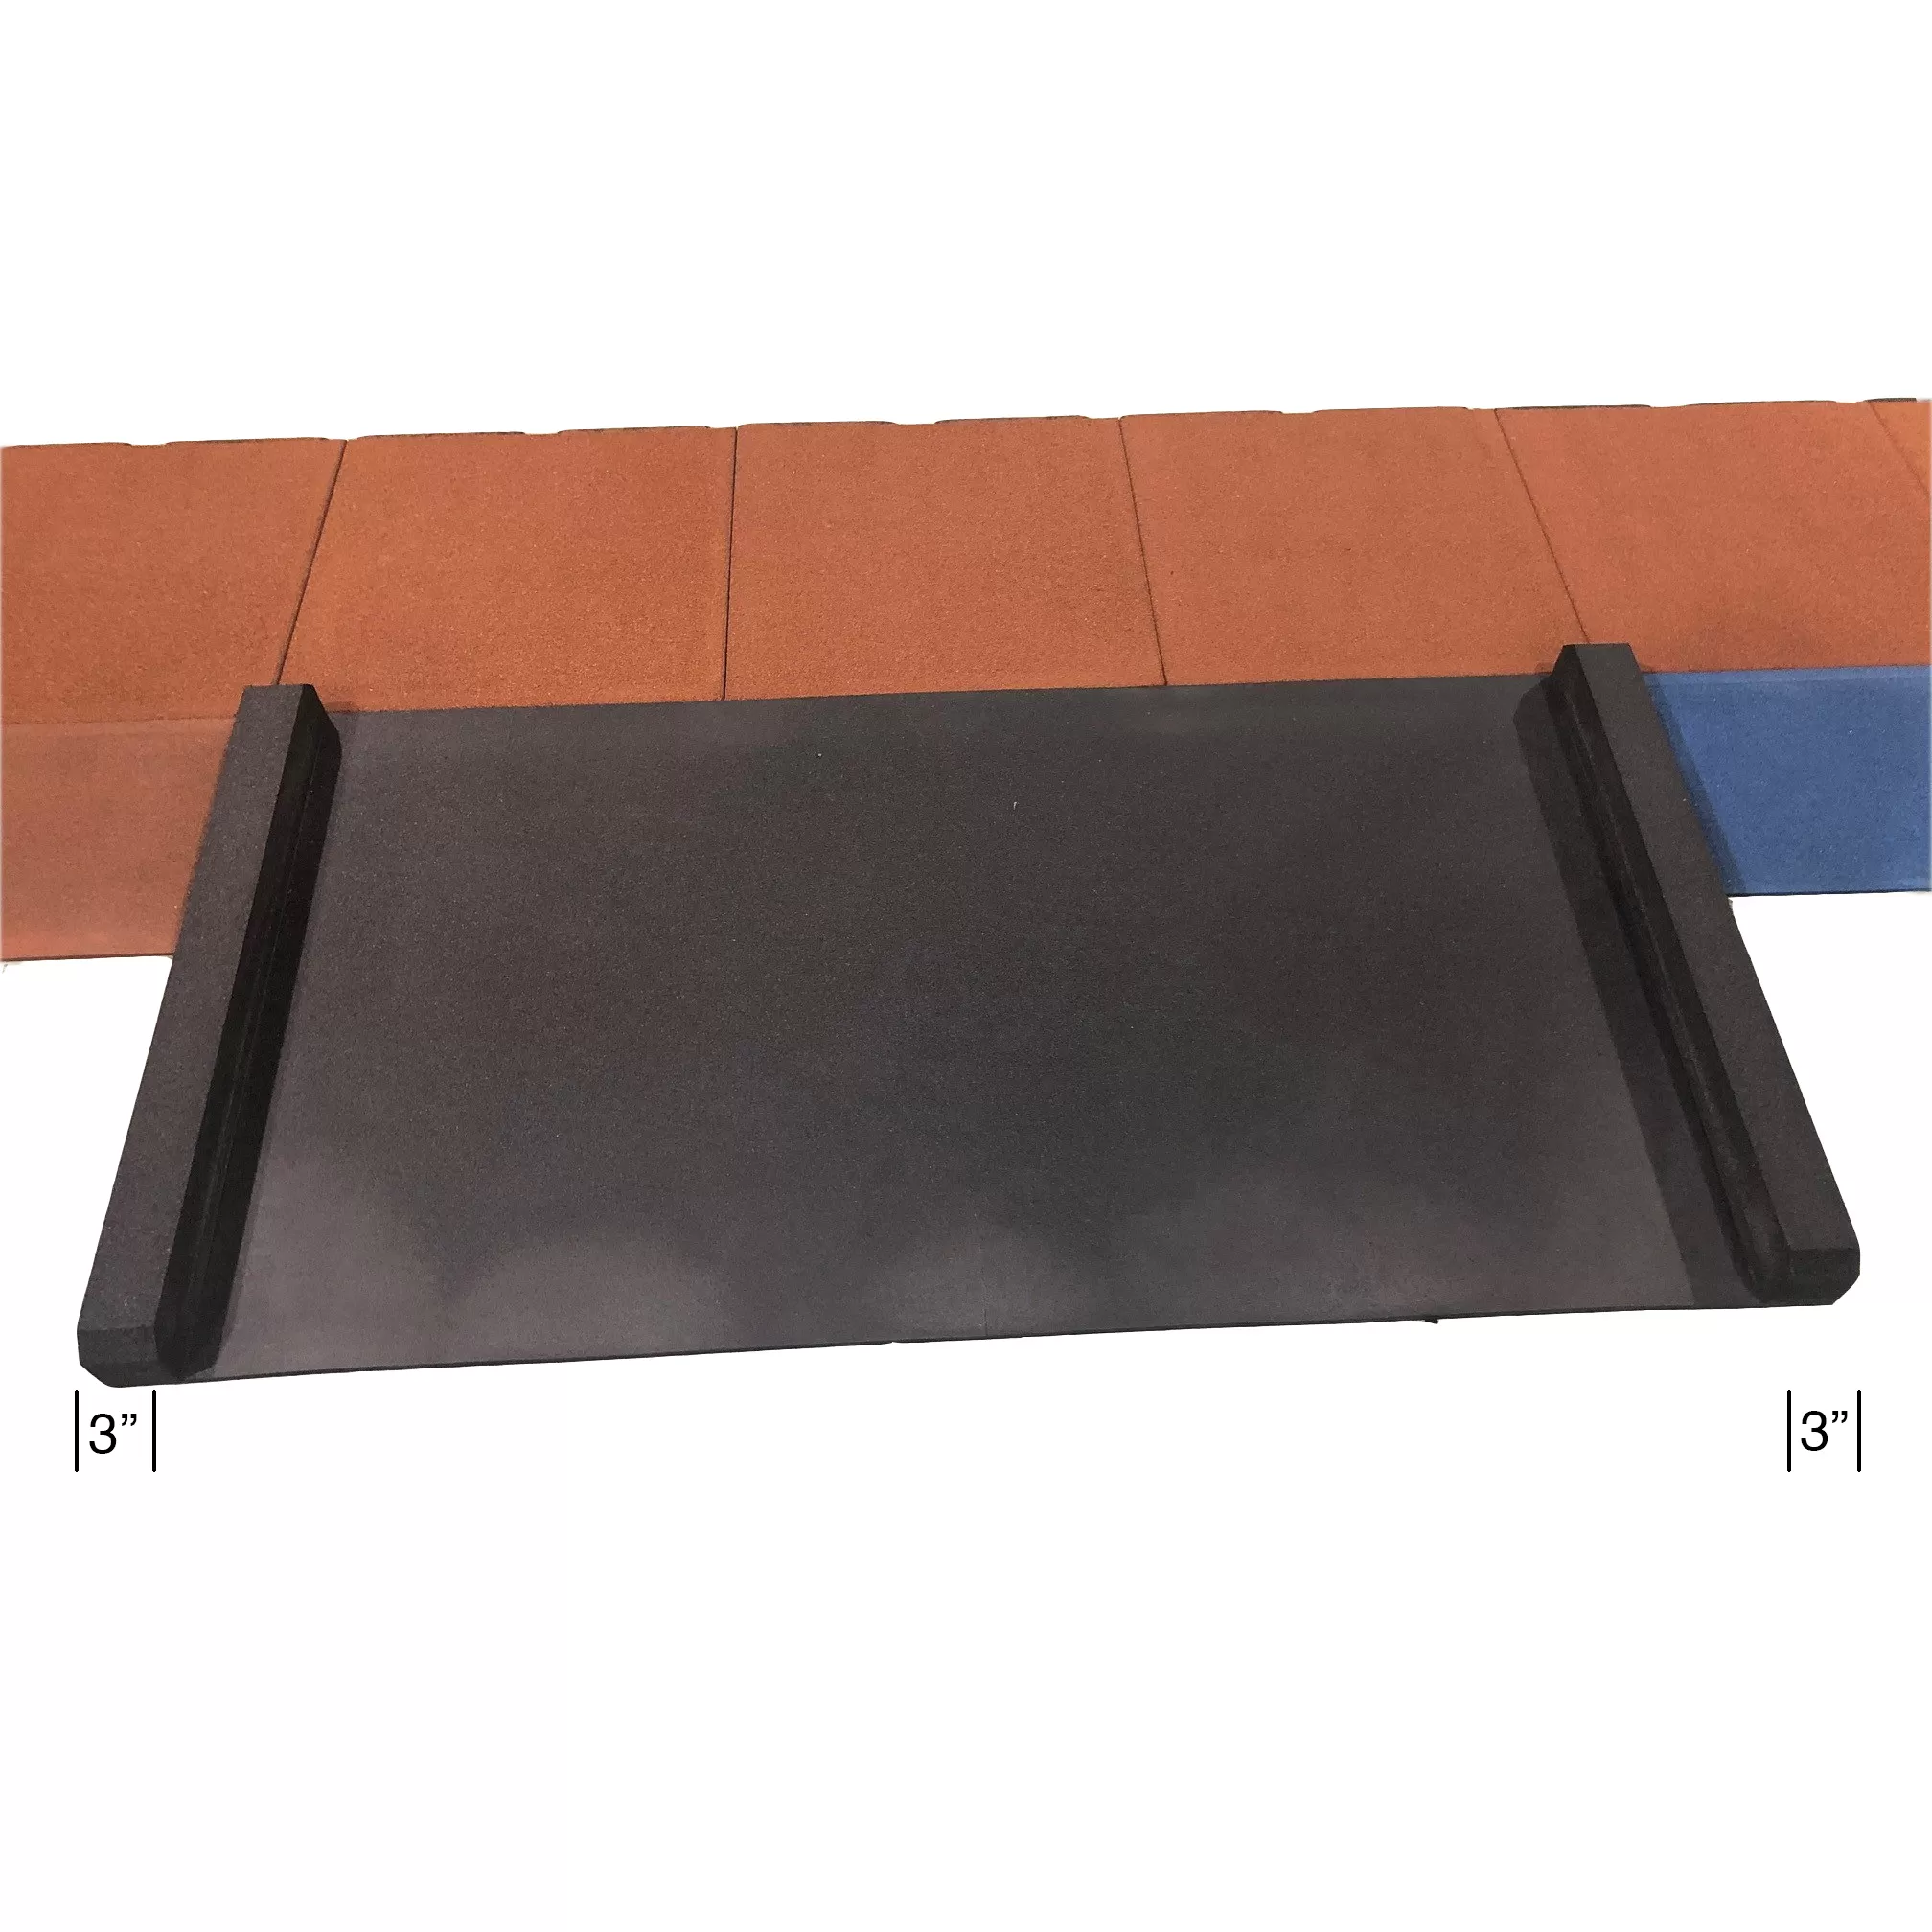 ada compliant rubber ramps for playground flooring